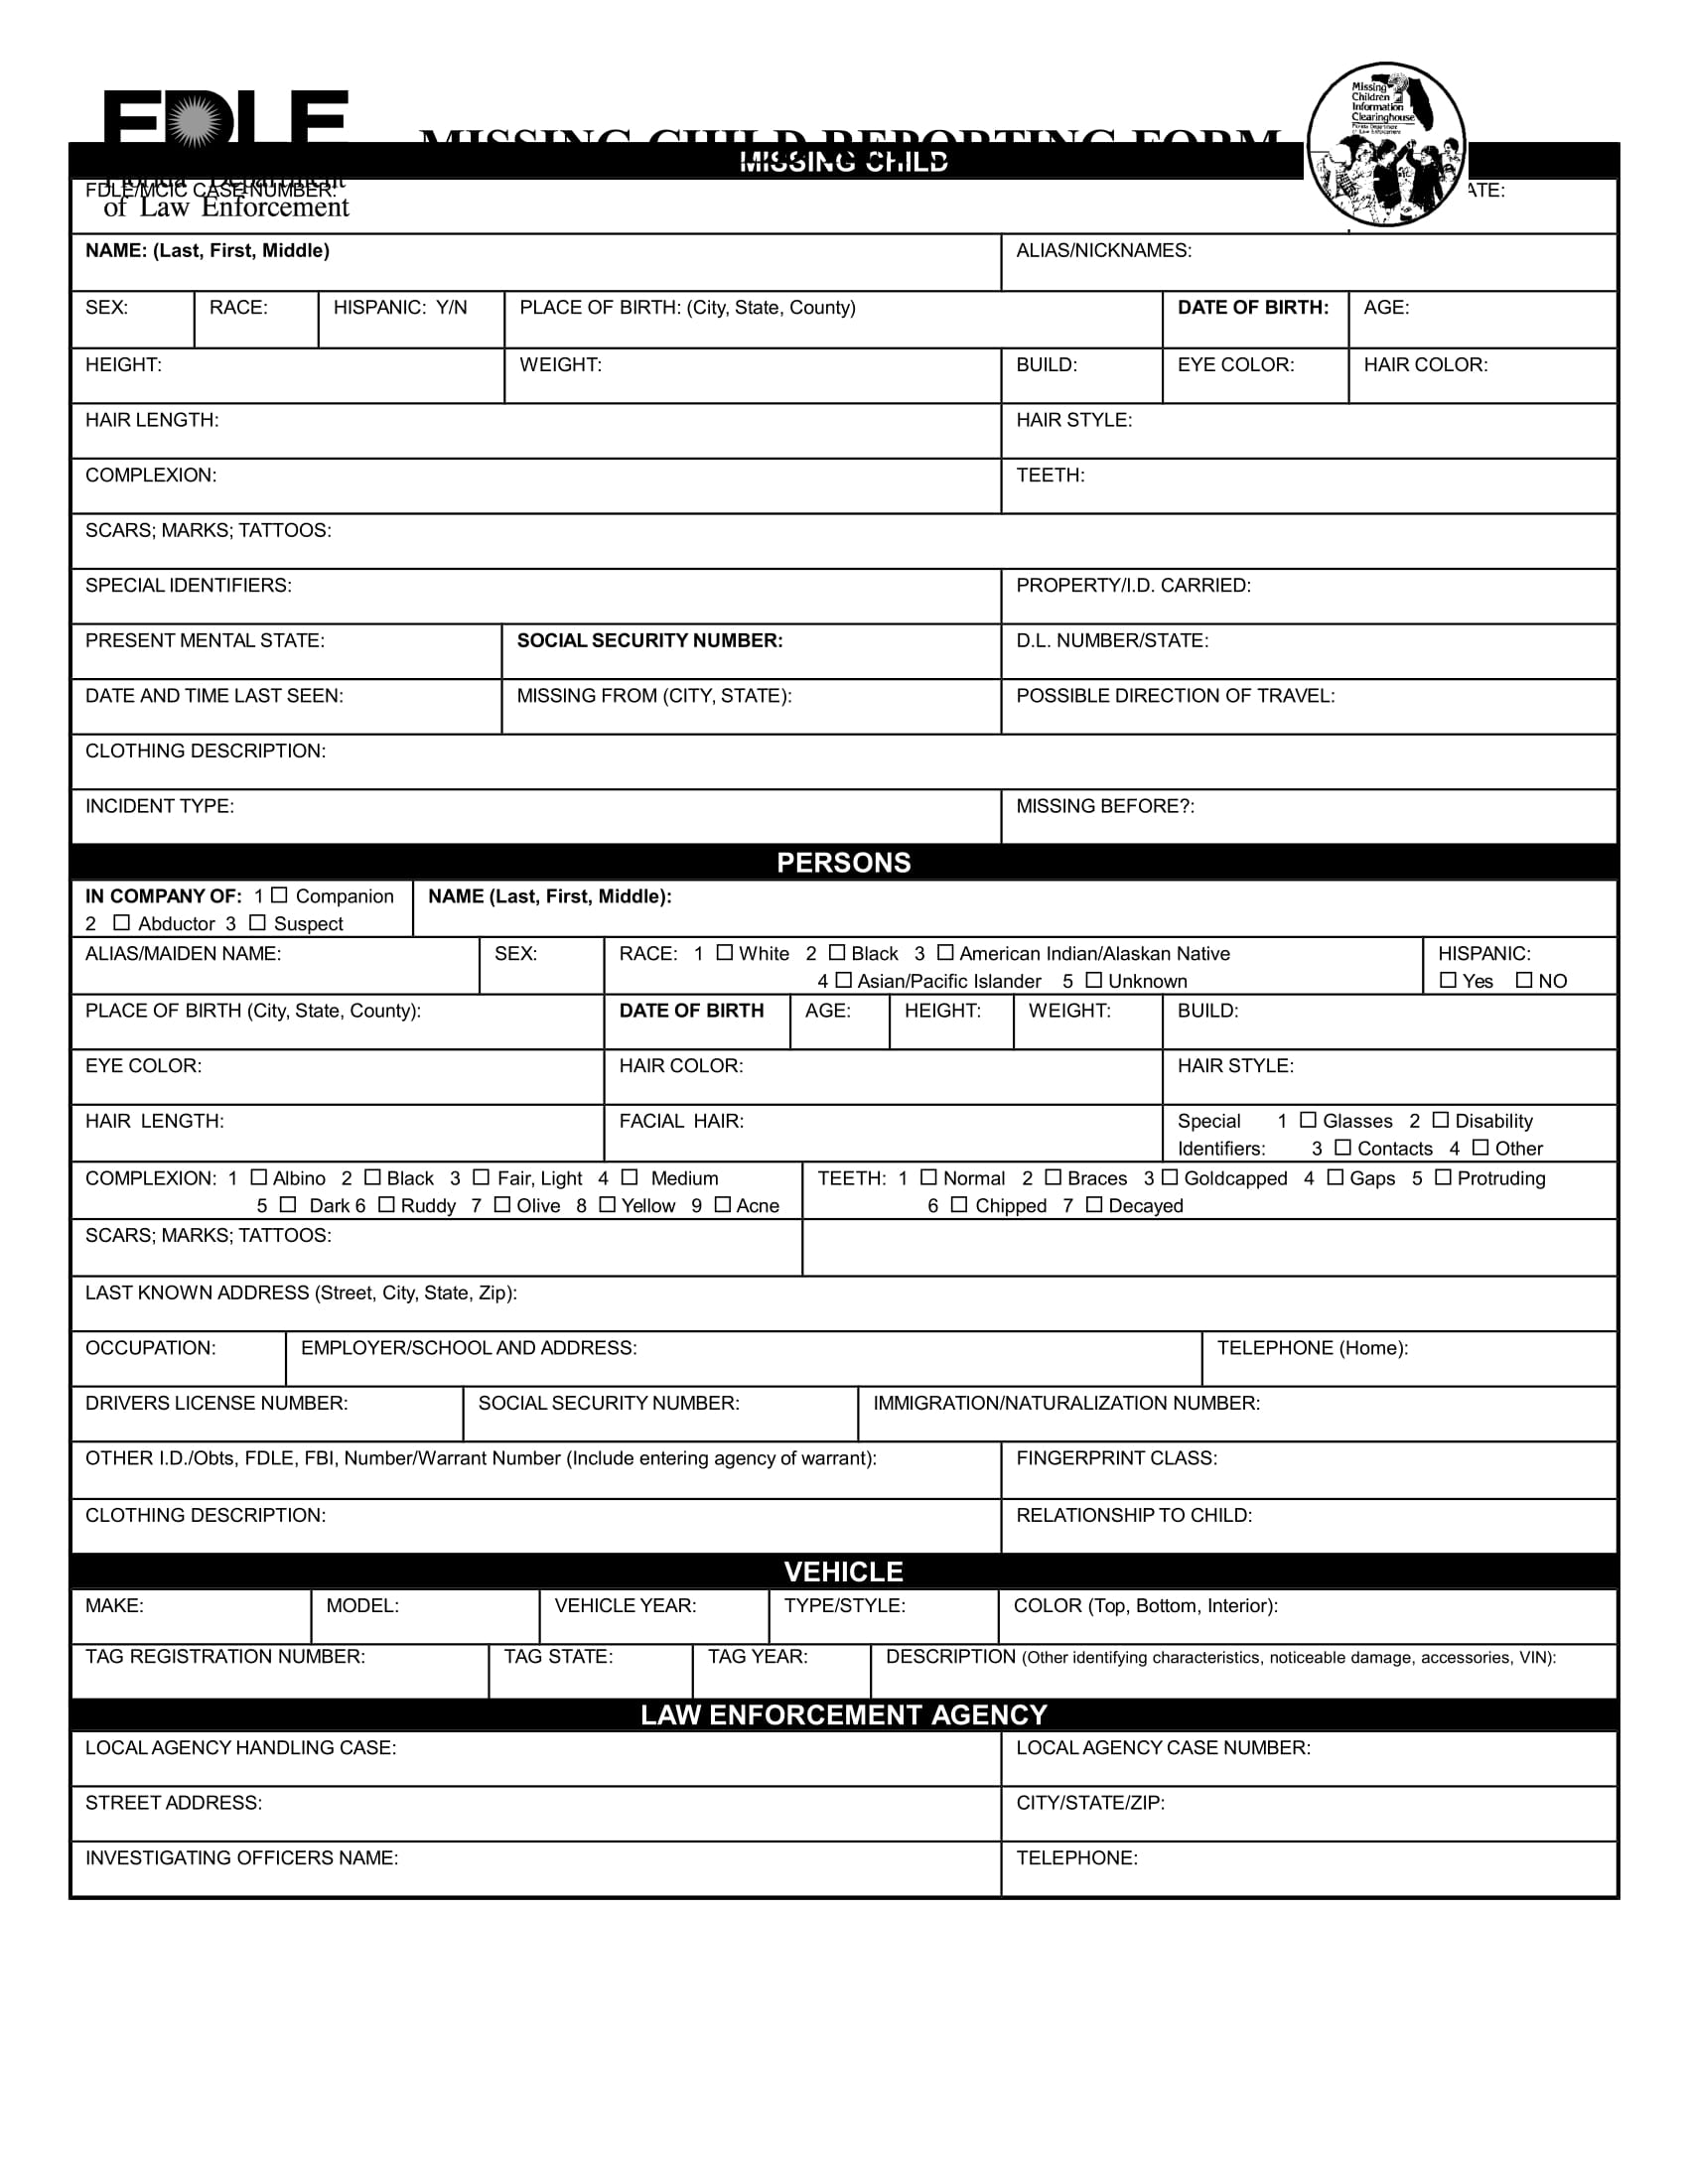 missing child reporting form 1